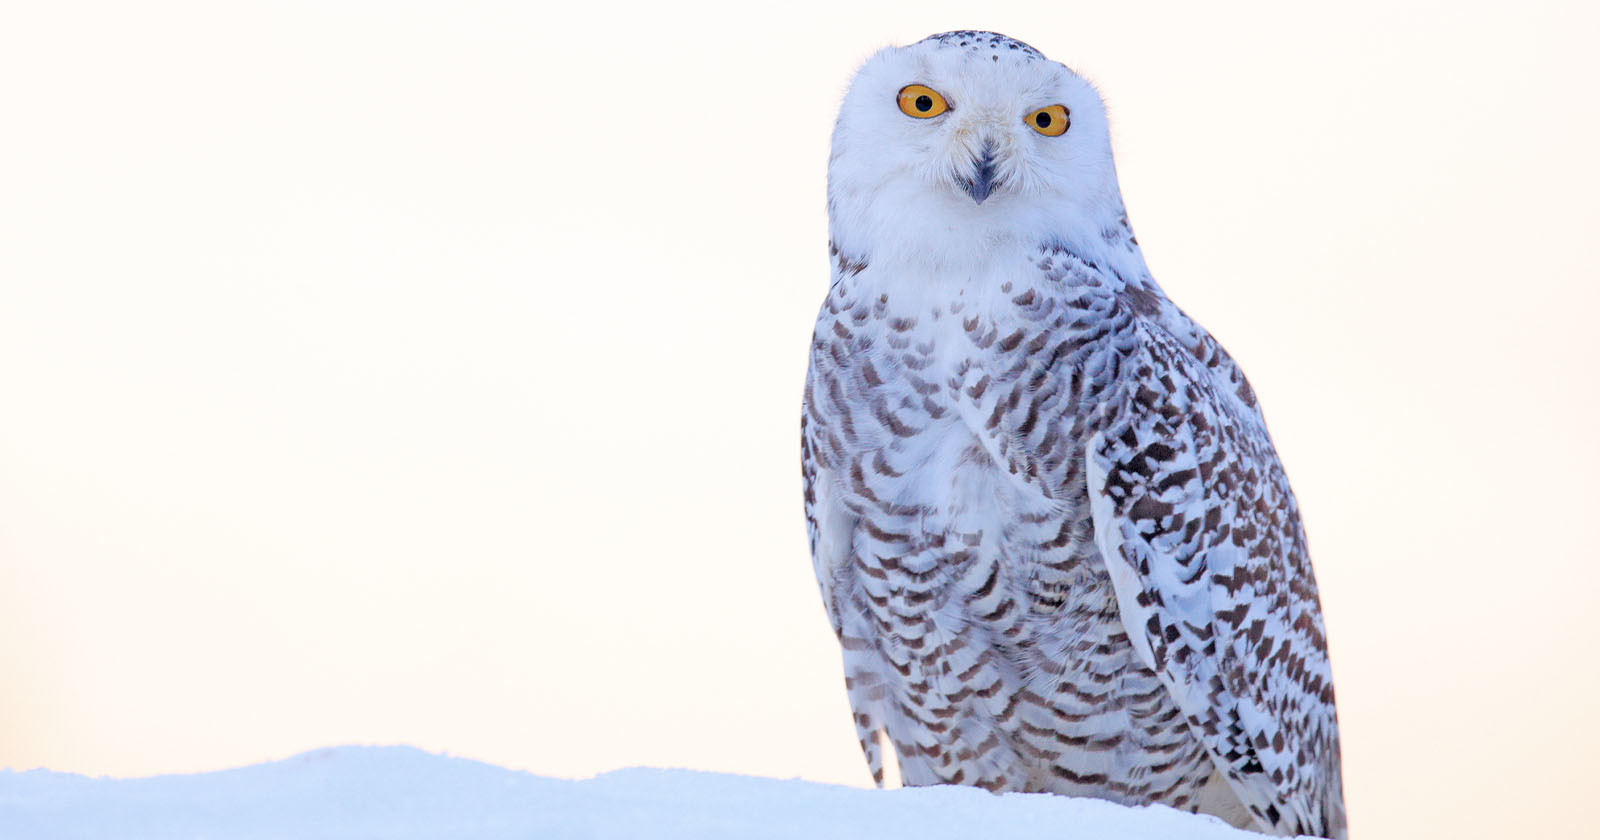 Facebook Groups Ban Paparazzi-Like Photographs of Snowy Owls